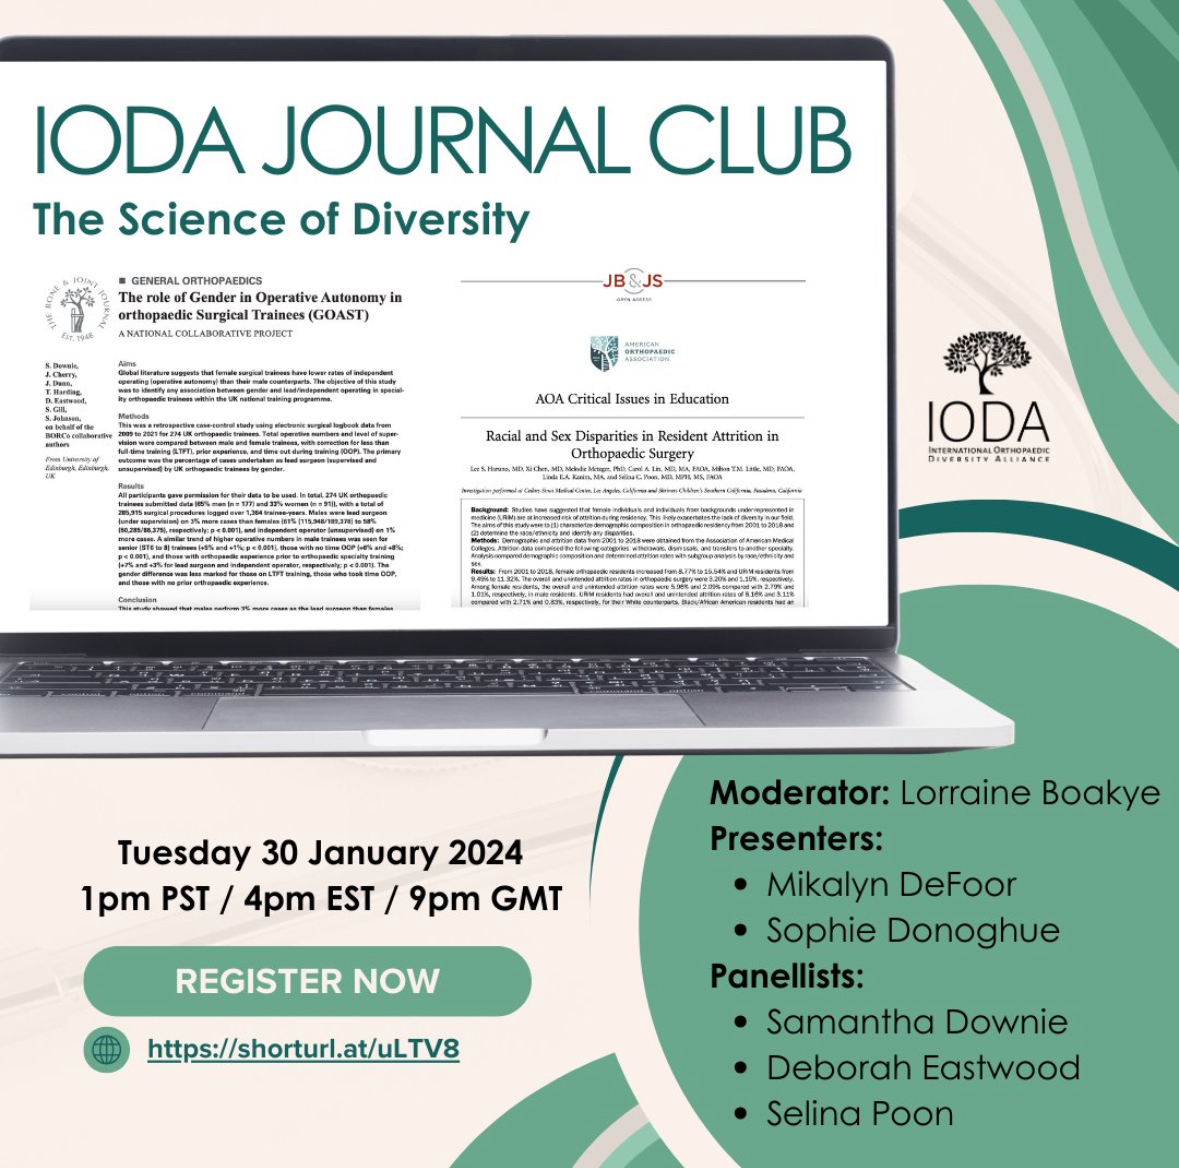 IODA Journal Club is just around the corner. Register now and join moderator @LoBoakye as we delve into two #ortho #DEI articles with our panelists and authors: Dr. Mikalyn DeFoor, Dr. Sophie Donoghue, @Sdownie04, @deboraheastwood, and @drspoon8 Register: ow.ly/jZi950Qvlrw